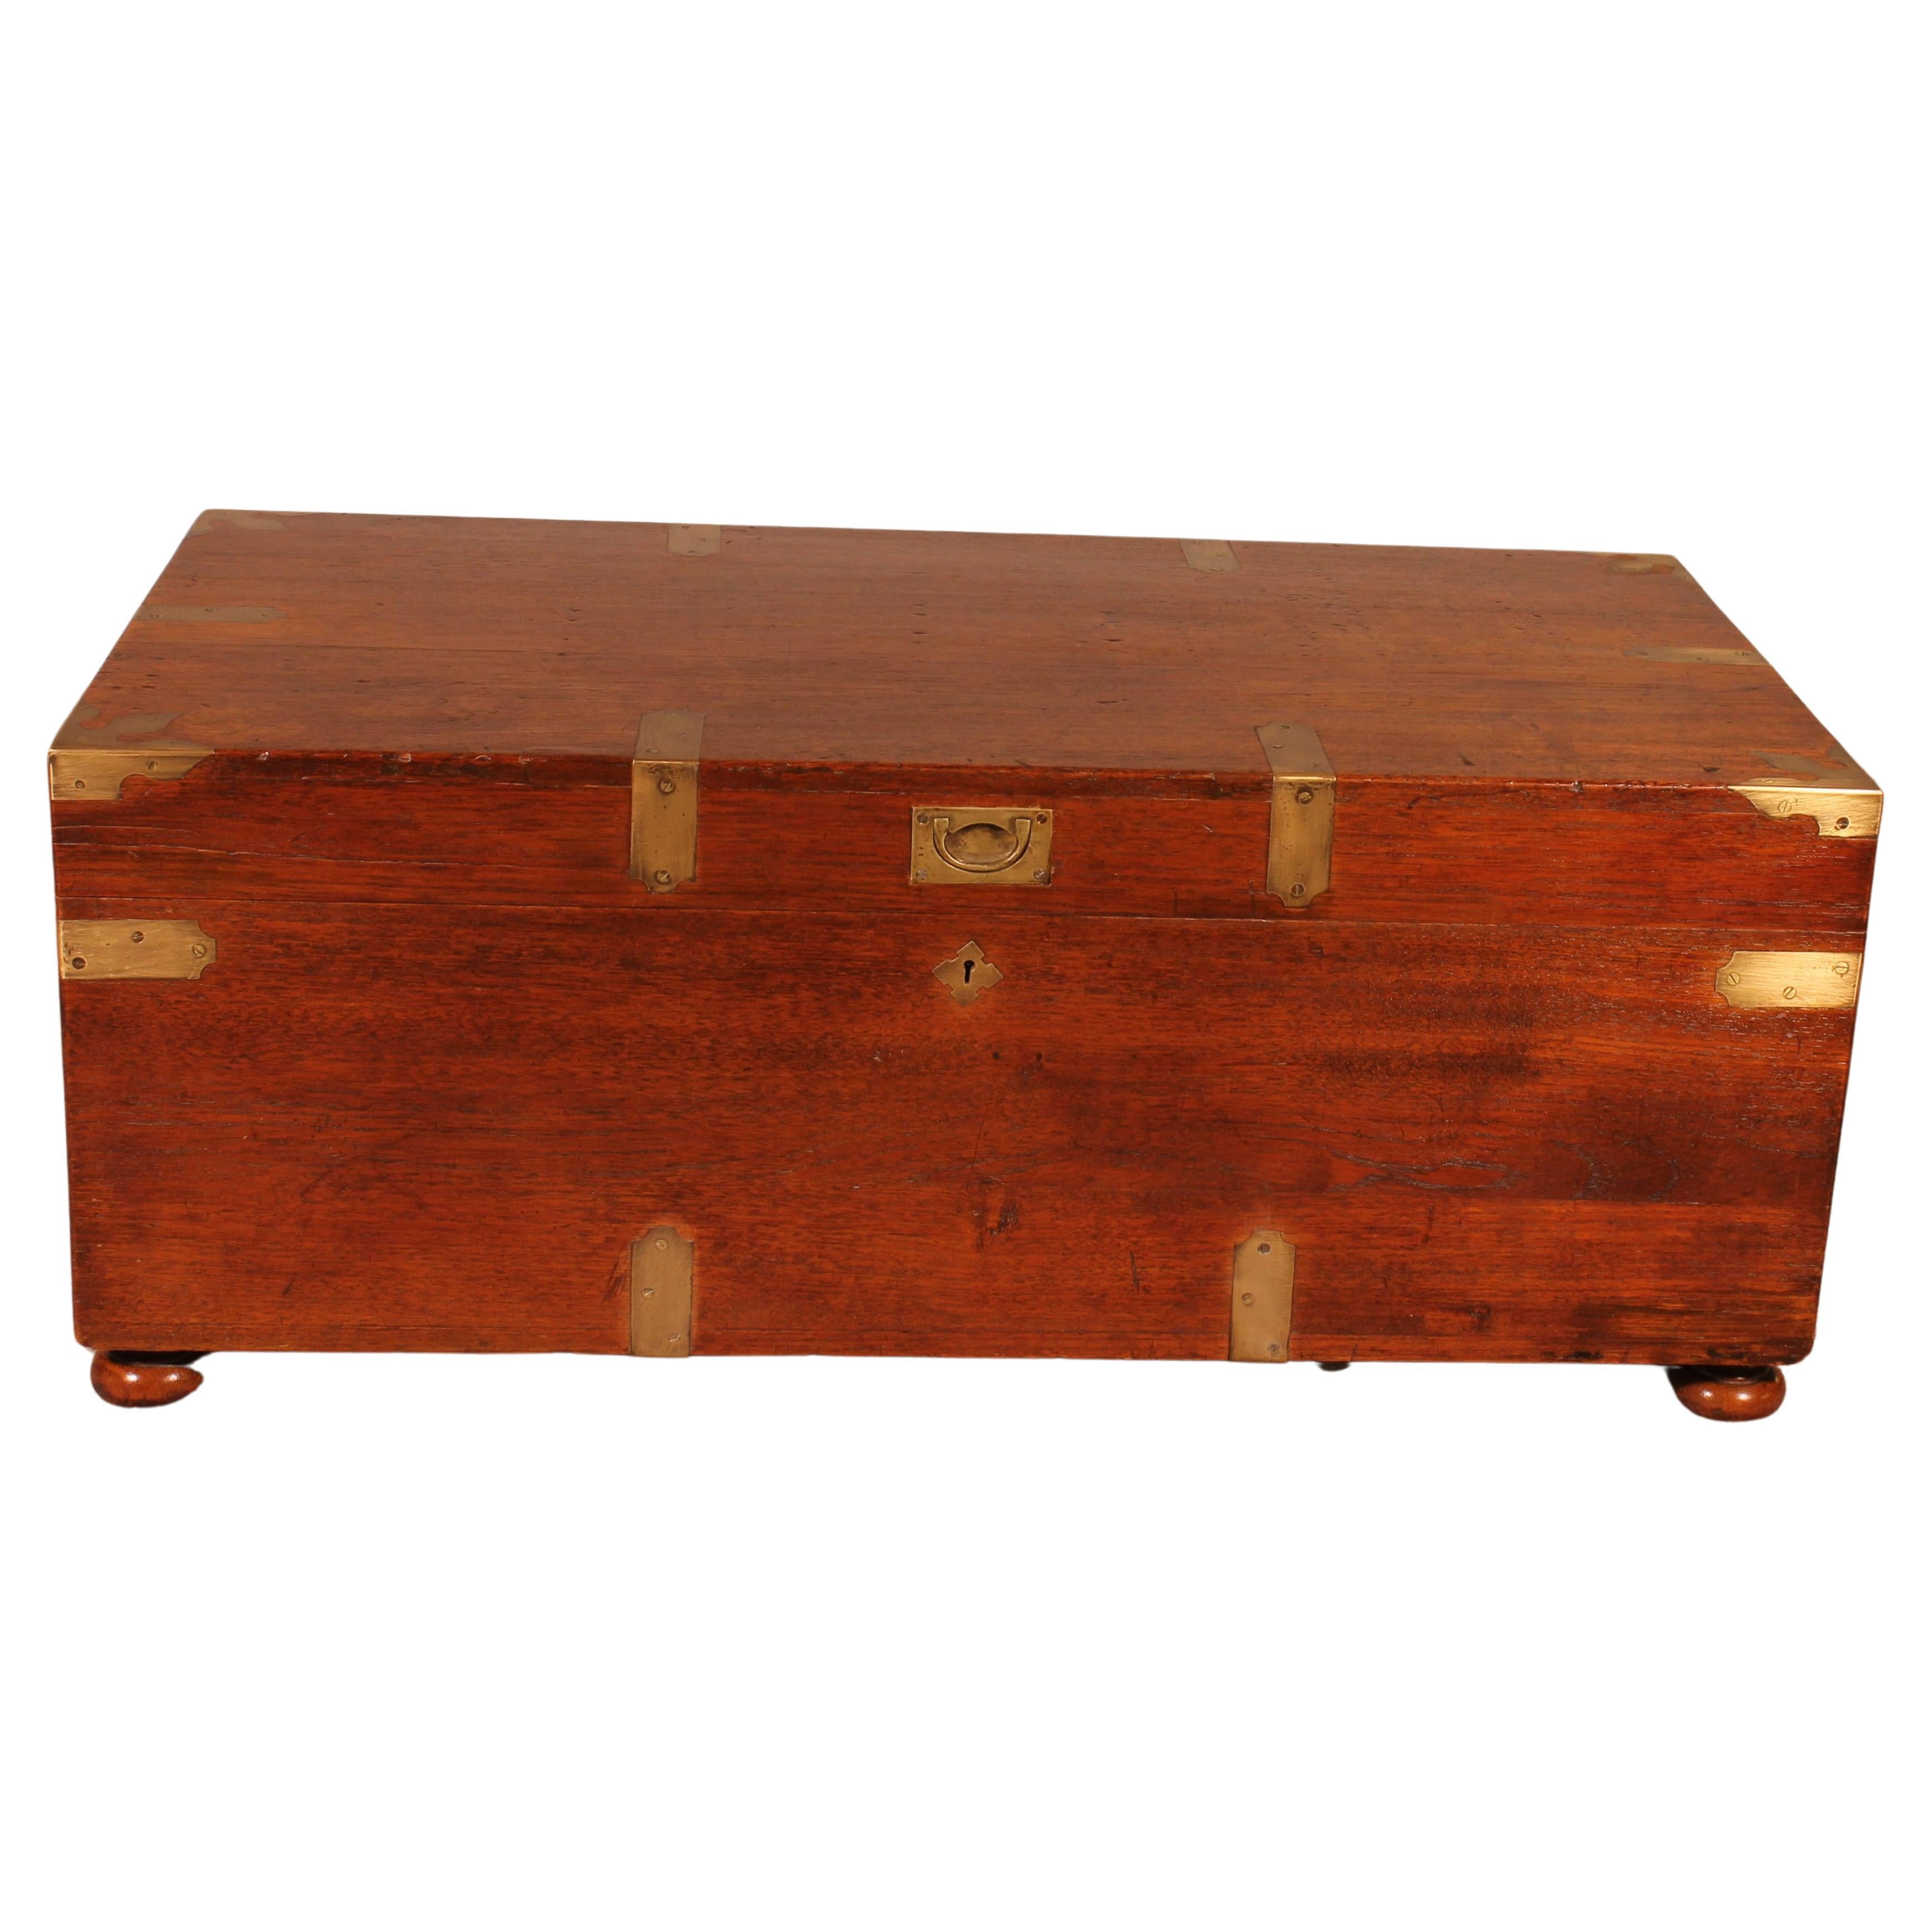 Teak Campaign Or Marine Chest From The 19th Century